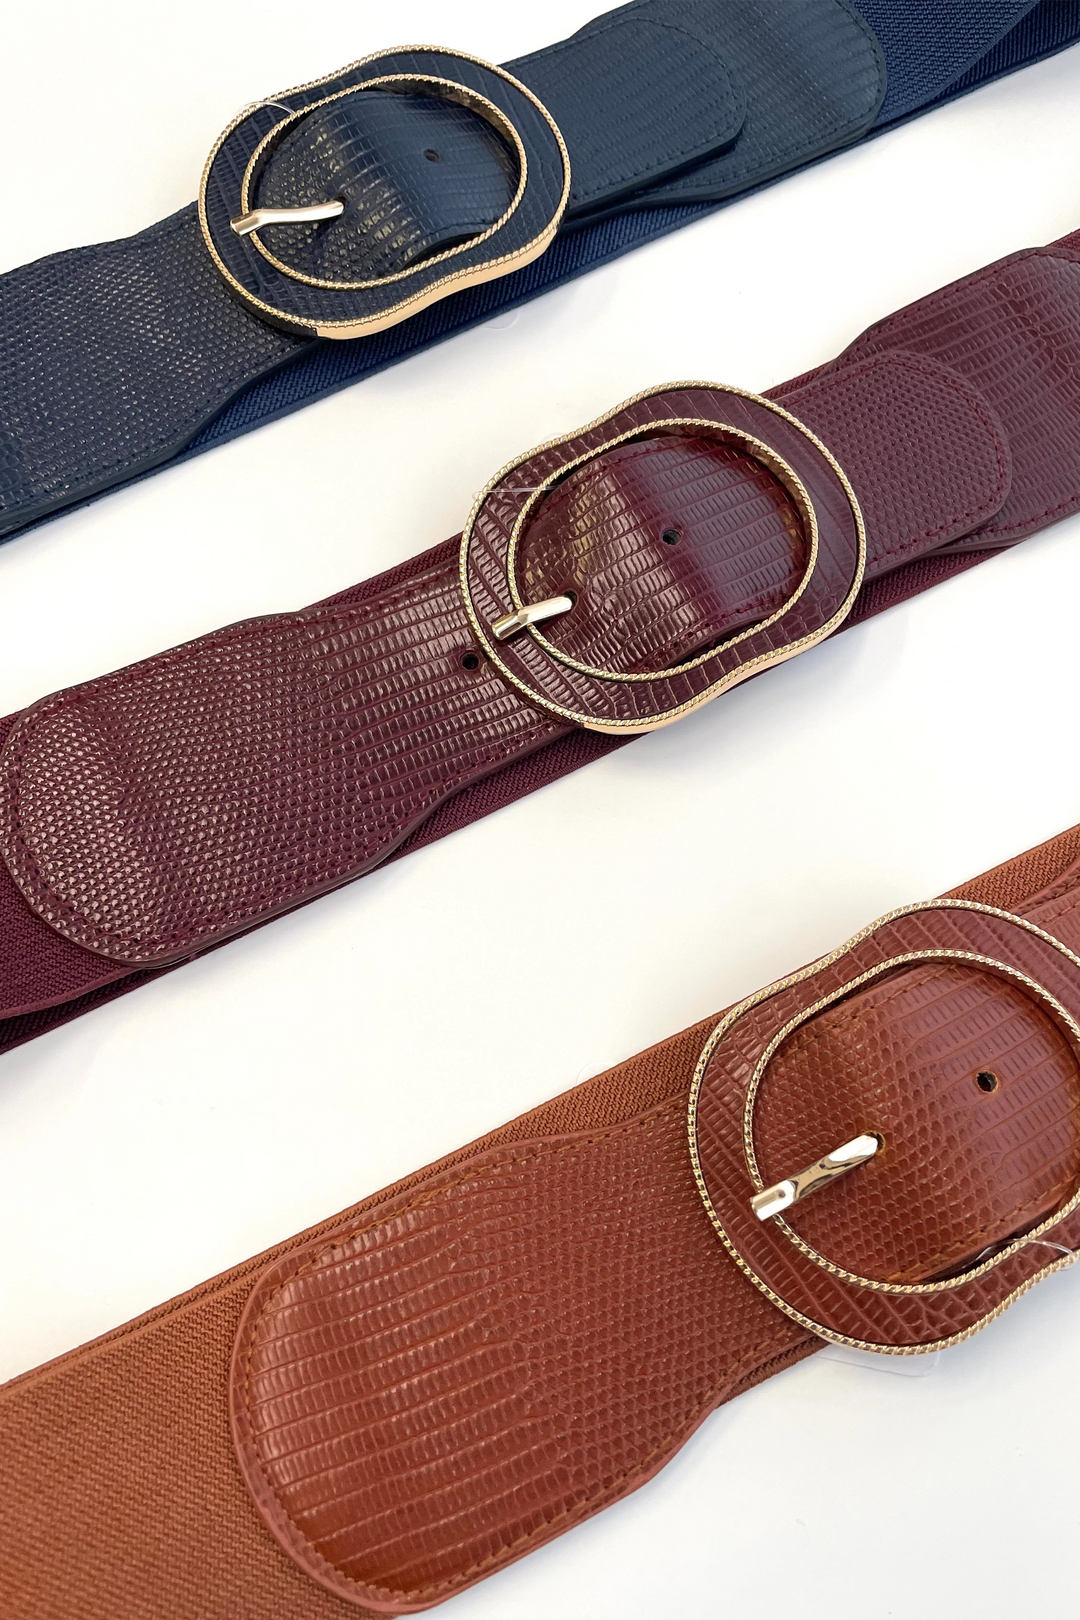 Crafted from faux leather and a stretch fabric, this belt features a gold lined buckle, allowing you to adjust and customize the fit for a secure and comfortable wear.